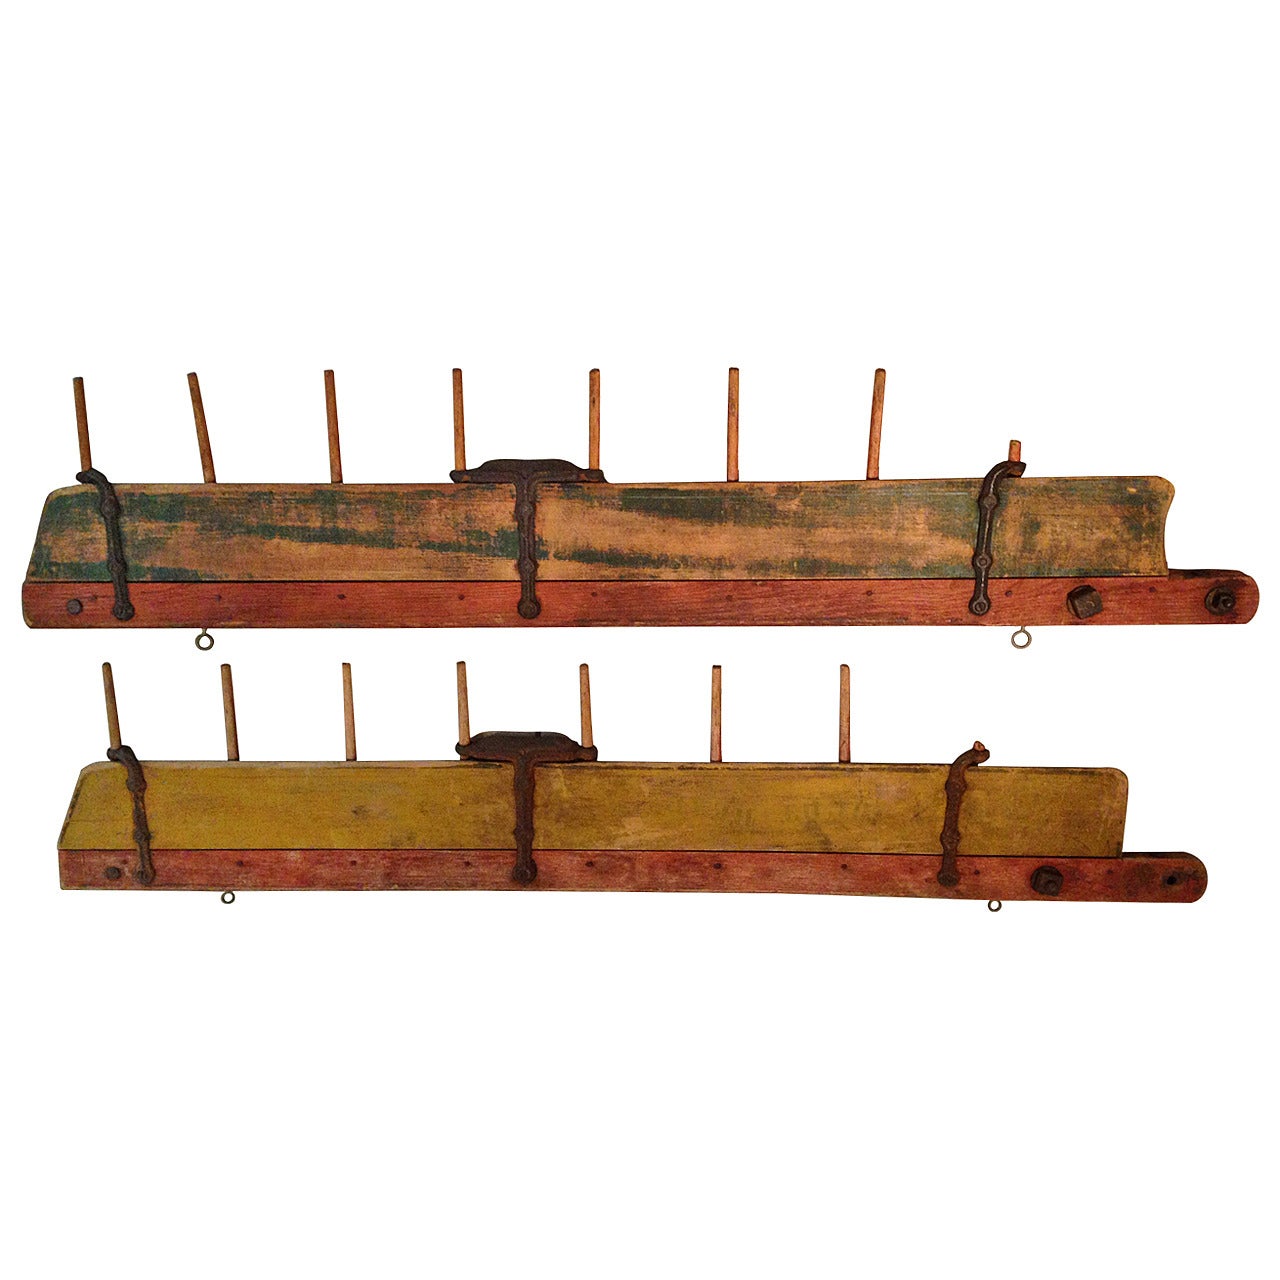 Mid-1800s Primitive Horse-drawn Farm Field Tillers from Maine (pair)